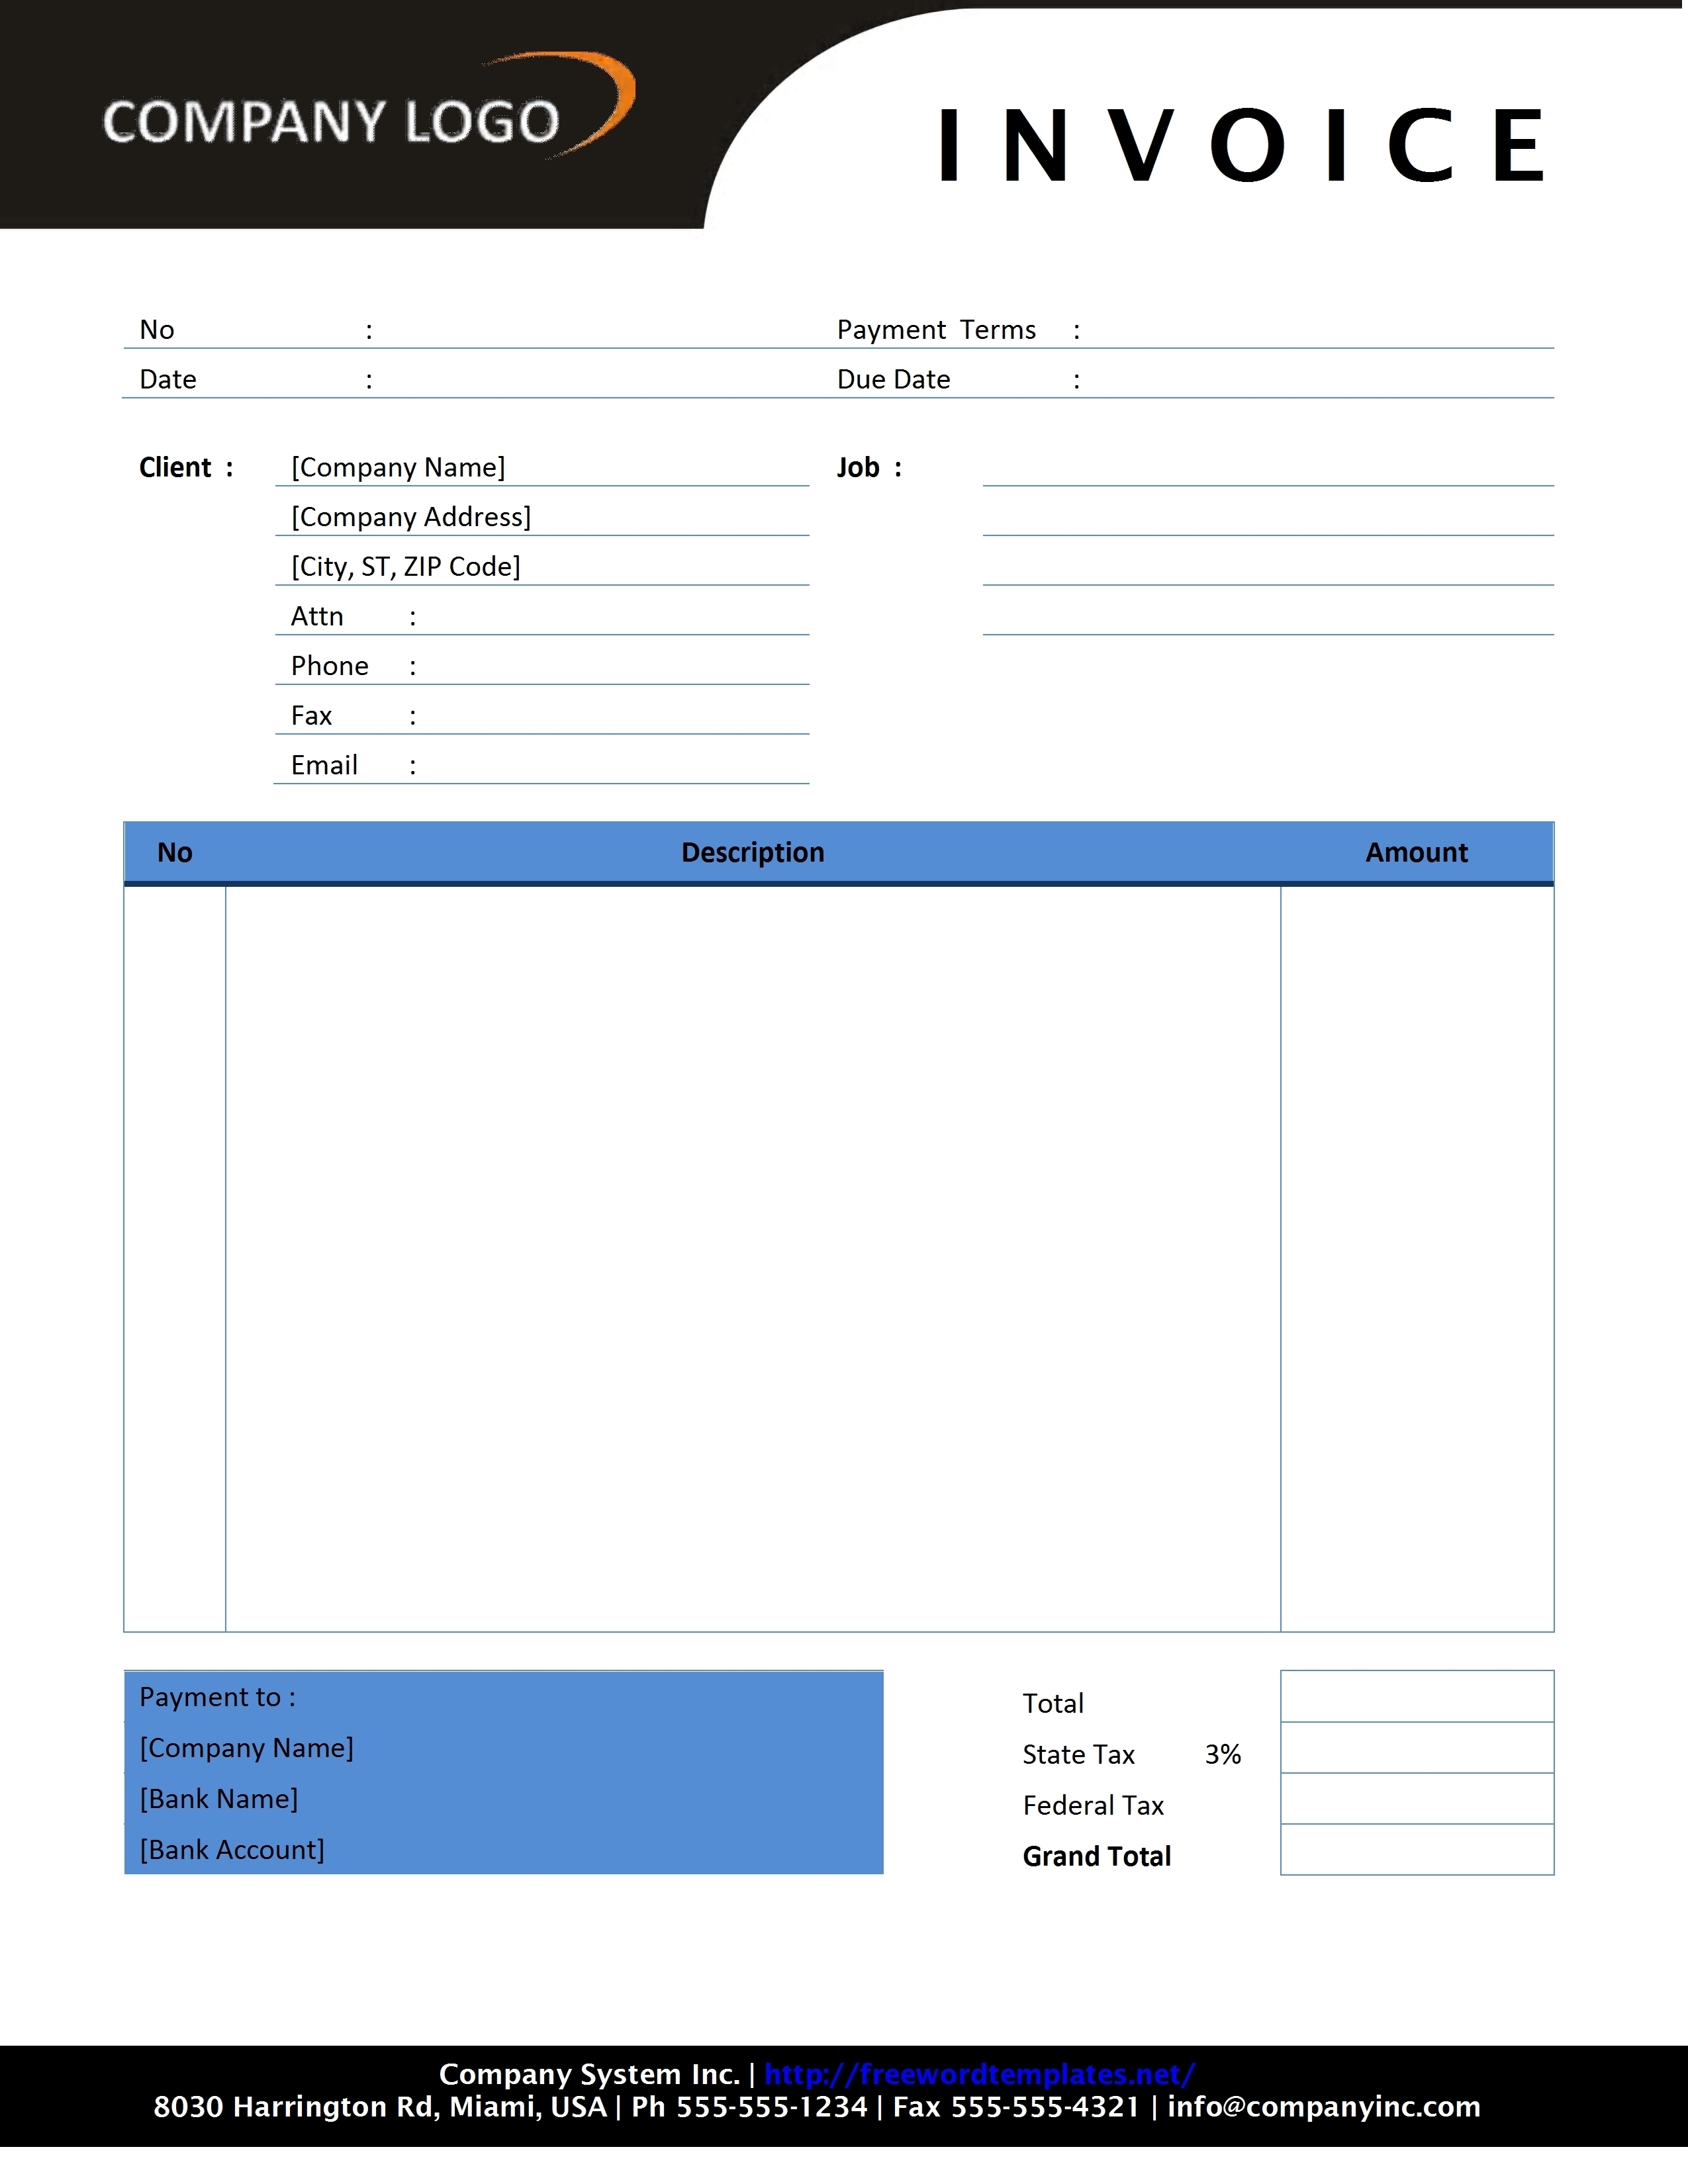 create-a-invoice-template-in-word-eogase